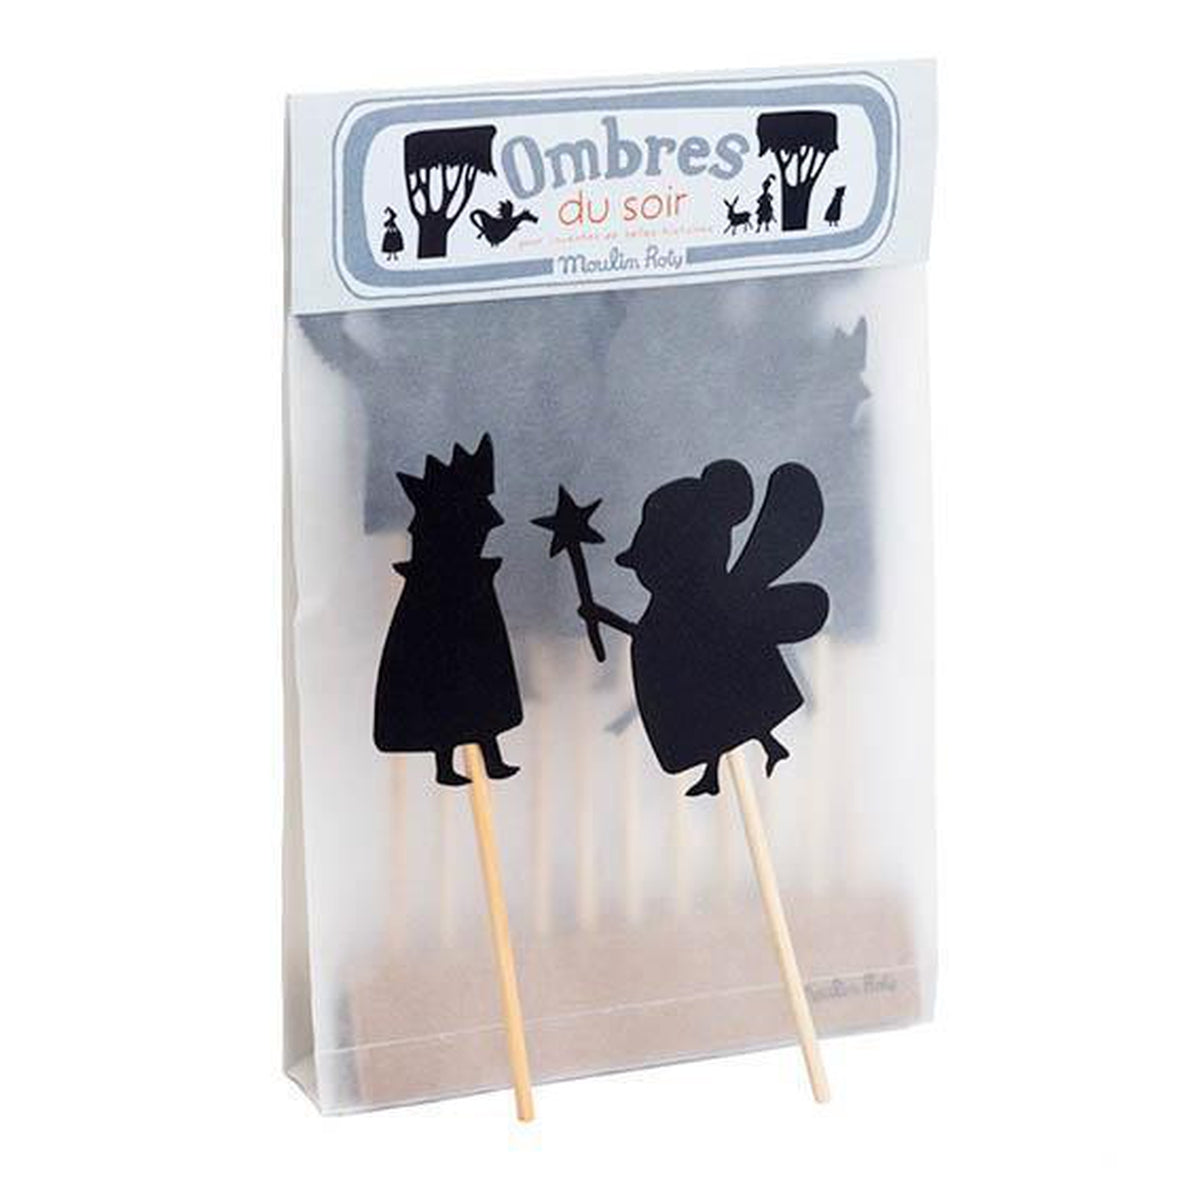 Moulin Roty fairytale shadow puppets-pocket money-Fire the Imagination-Dilly Dally Kids